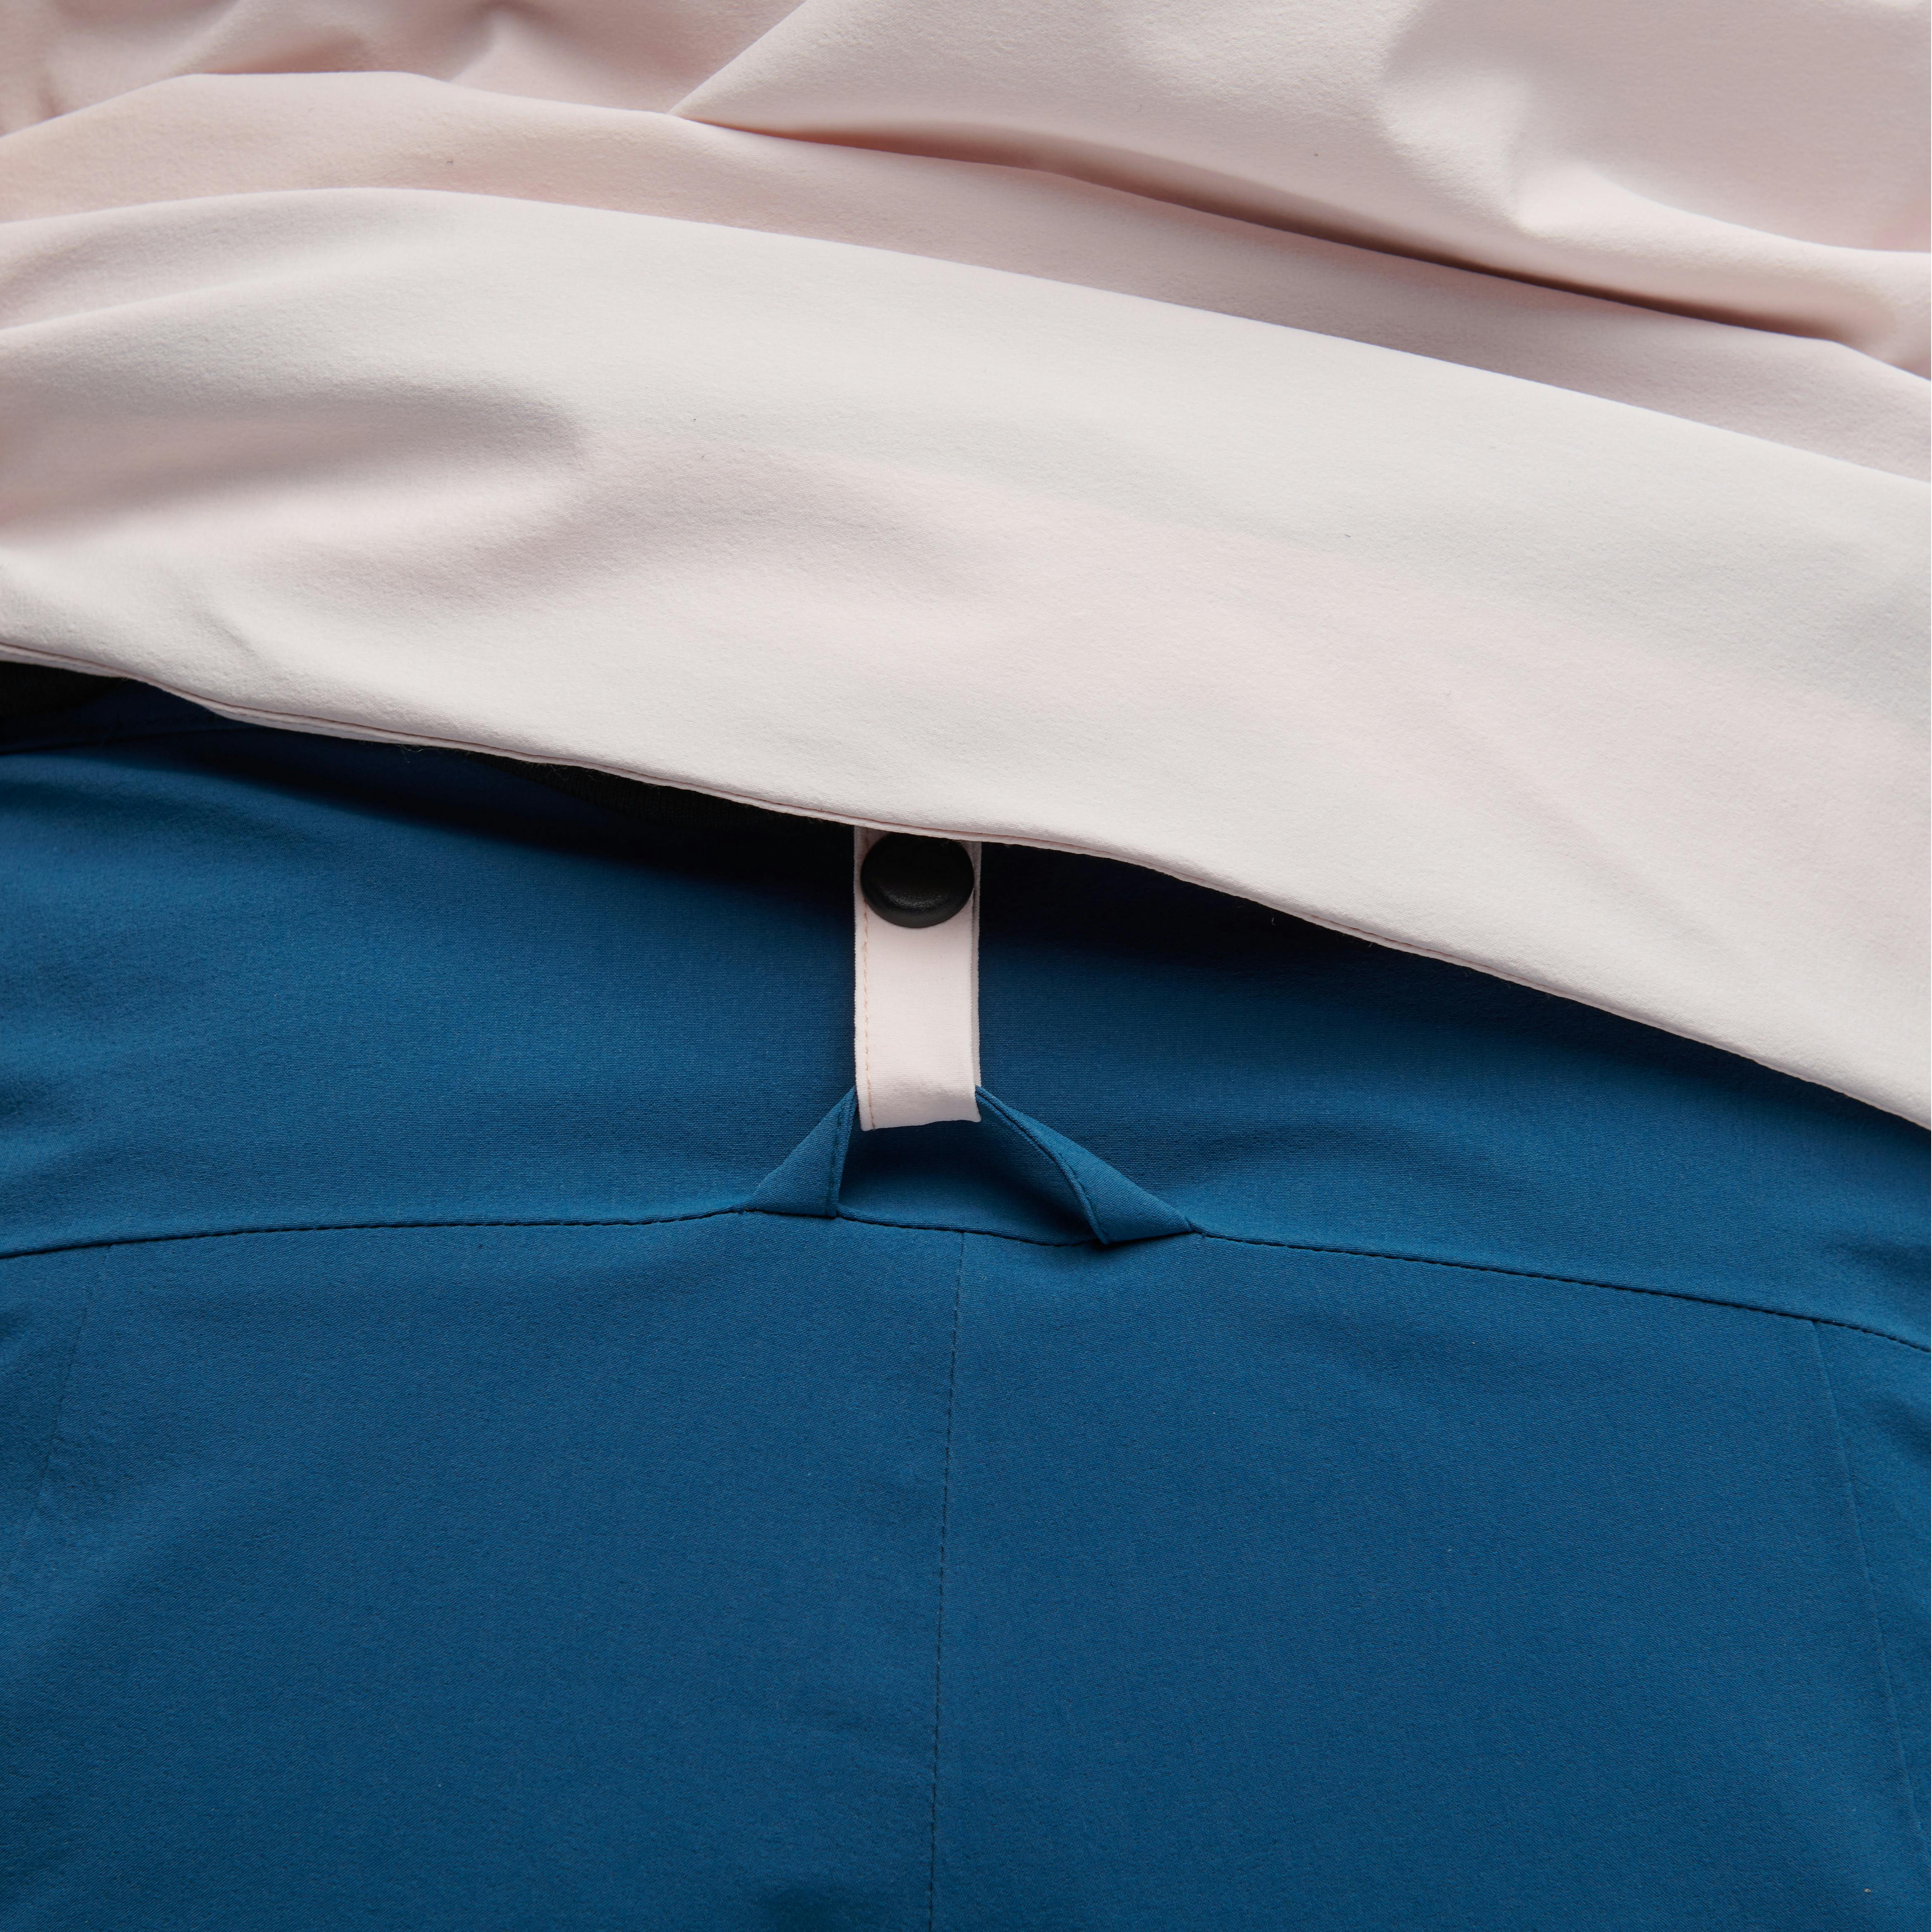 A close up of the hook and loop integration between the Recon Collection tops and bottoms.